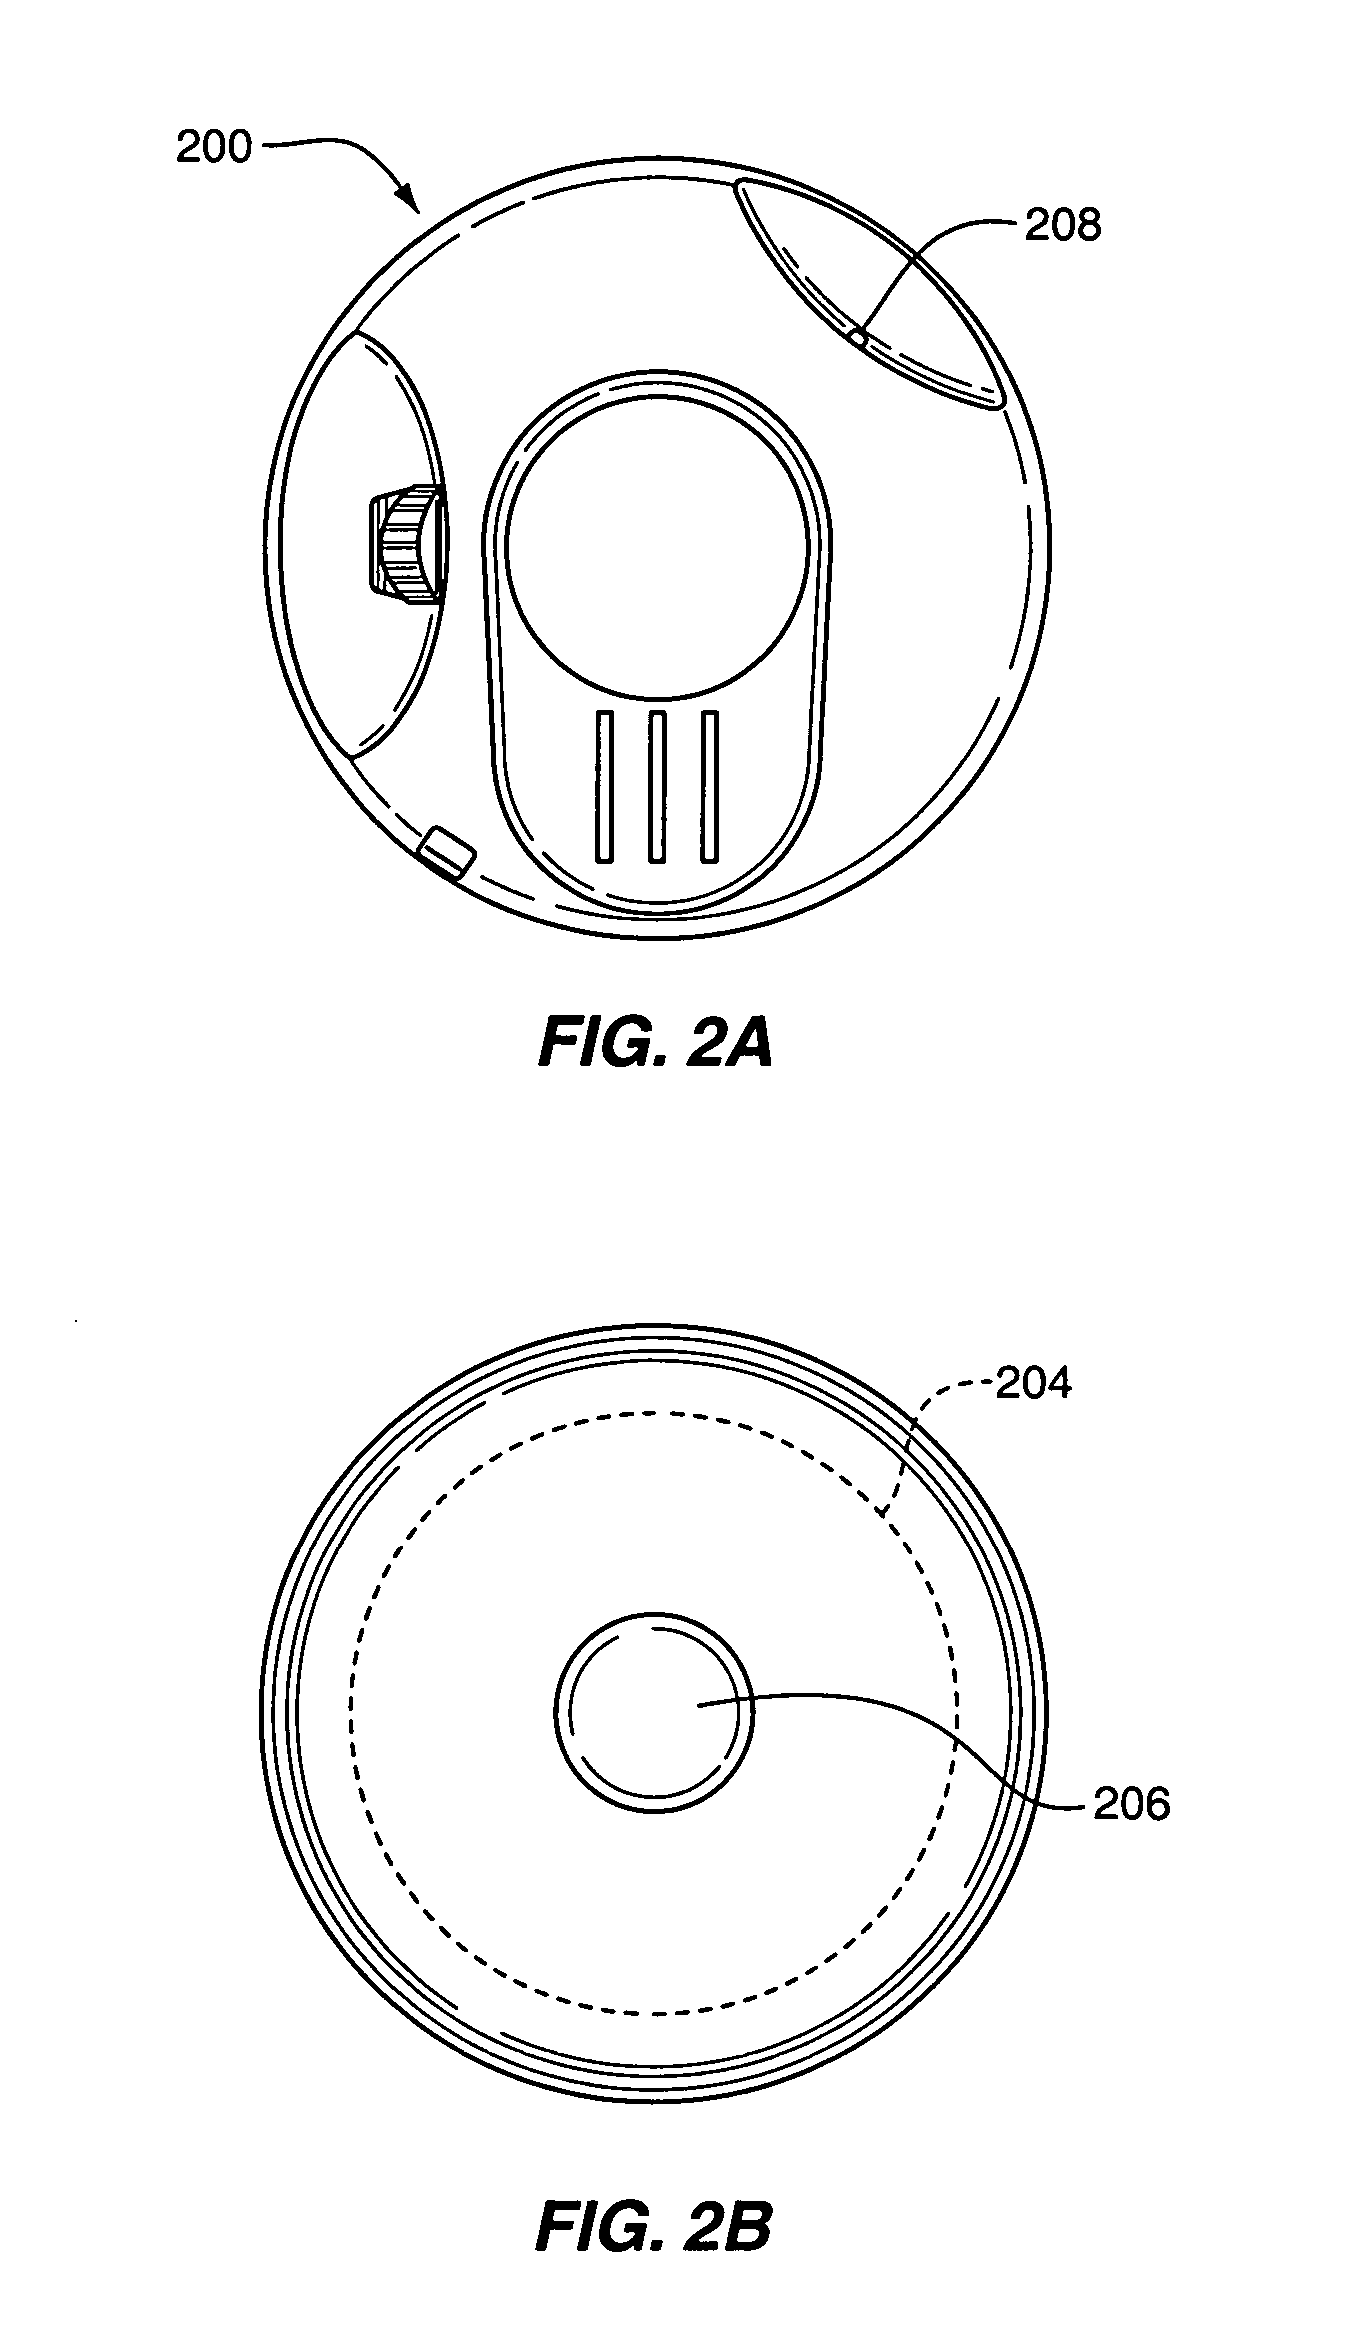 Apparatus for connection of implantable devices to the auditory system